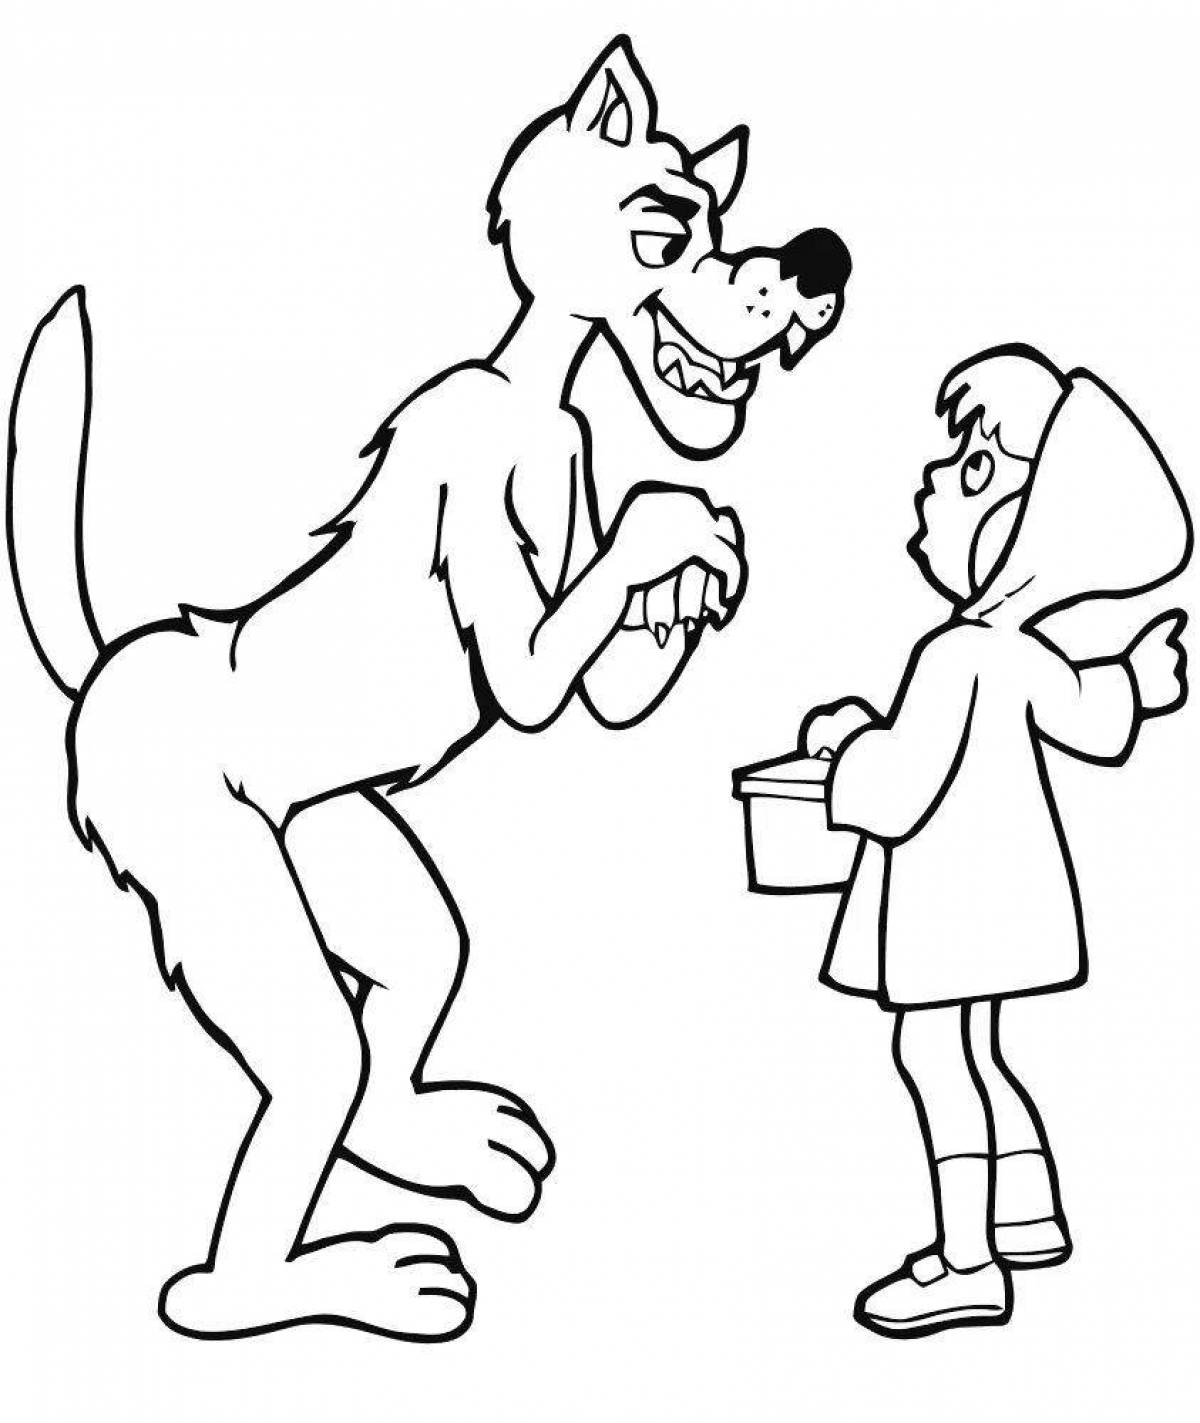 Exquisite wolf and little red riding hood coloring book